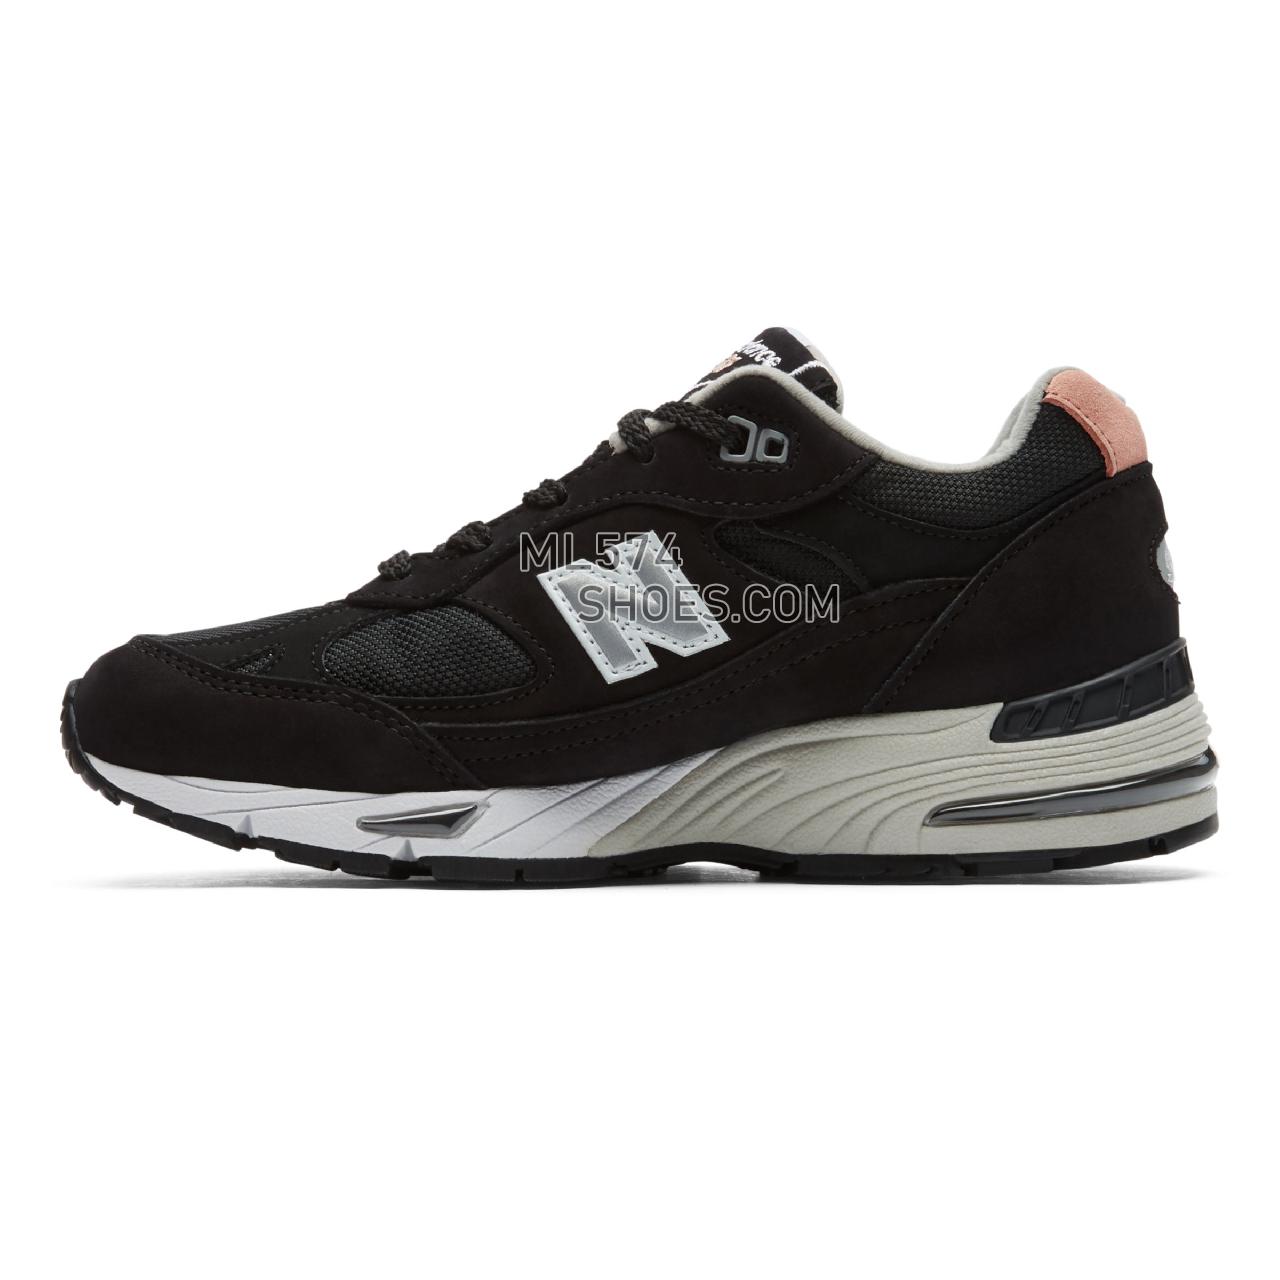 New Balance Made in UK 991 - Men's Made in UK 991 Classic - Black with Pink - W991KKP